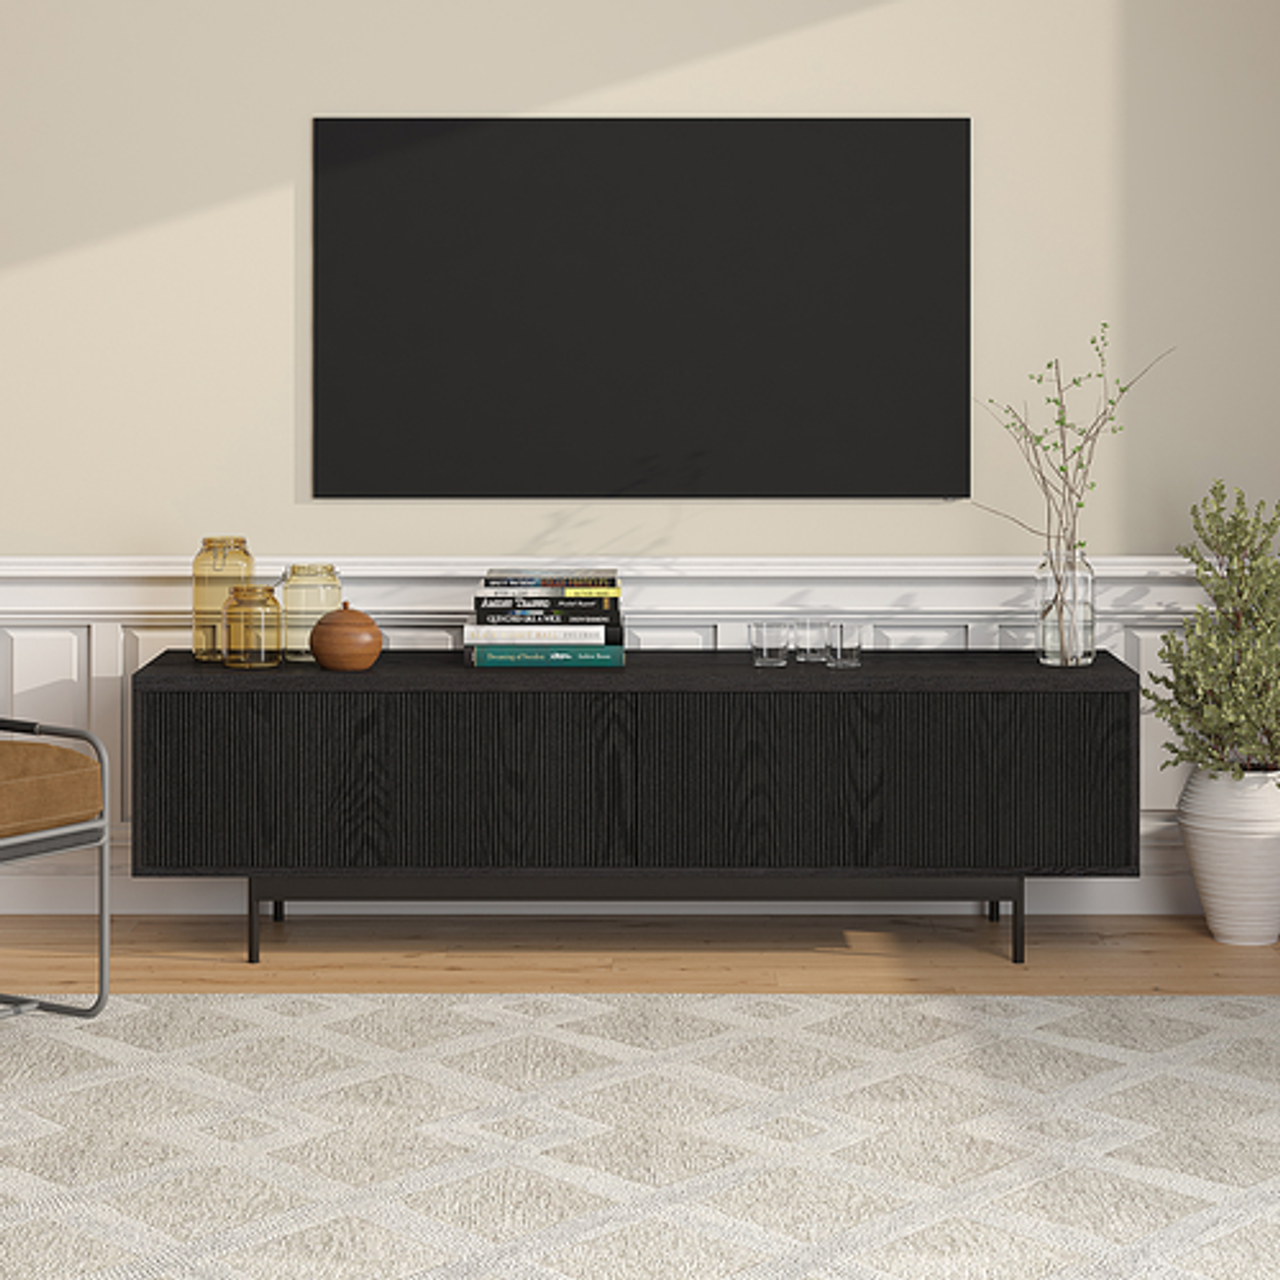 Camden&Wells - Whitman TV Stand Fits Most TVs up to 75 inches - Black Grain